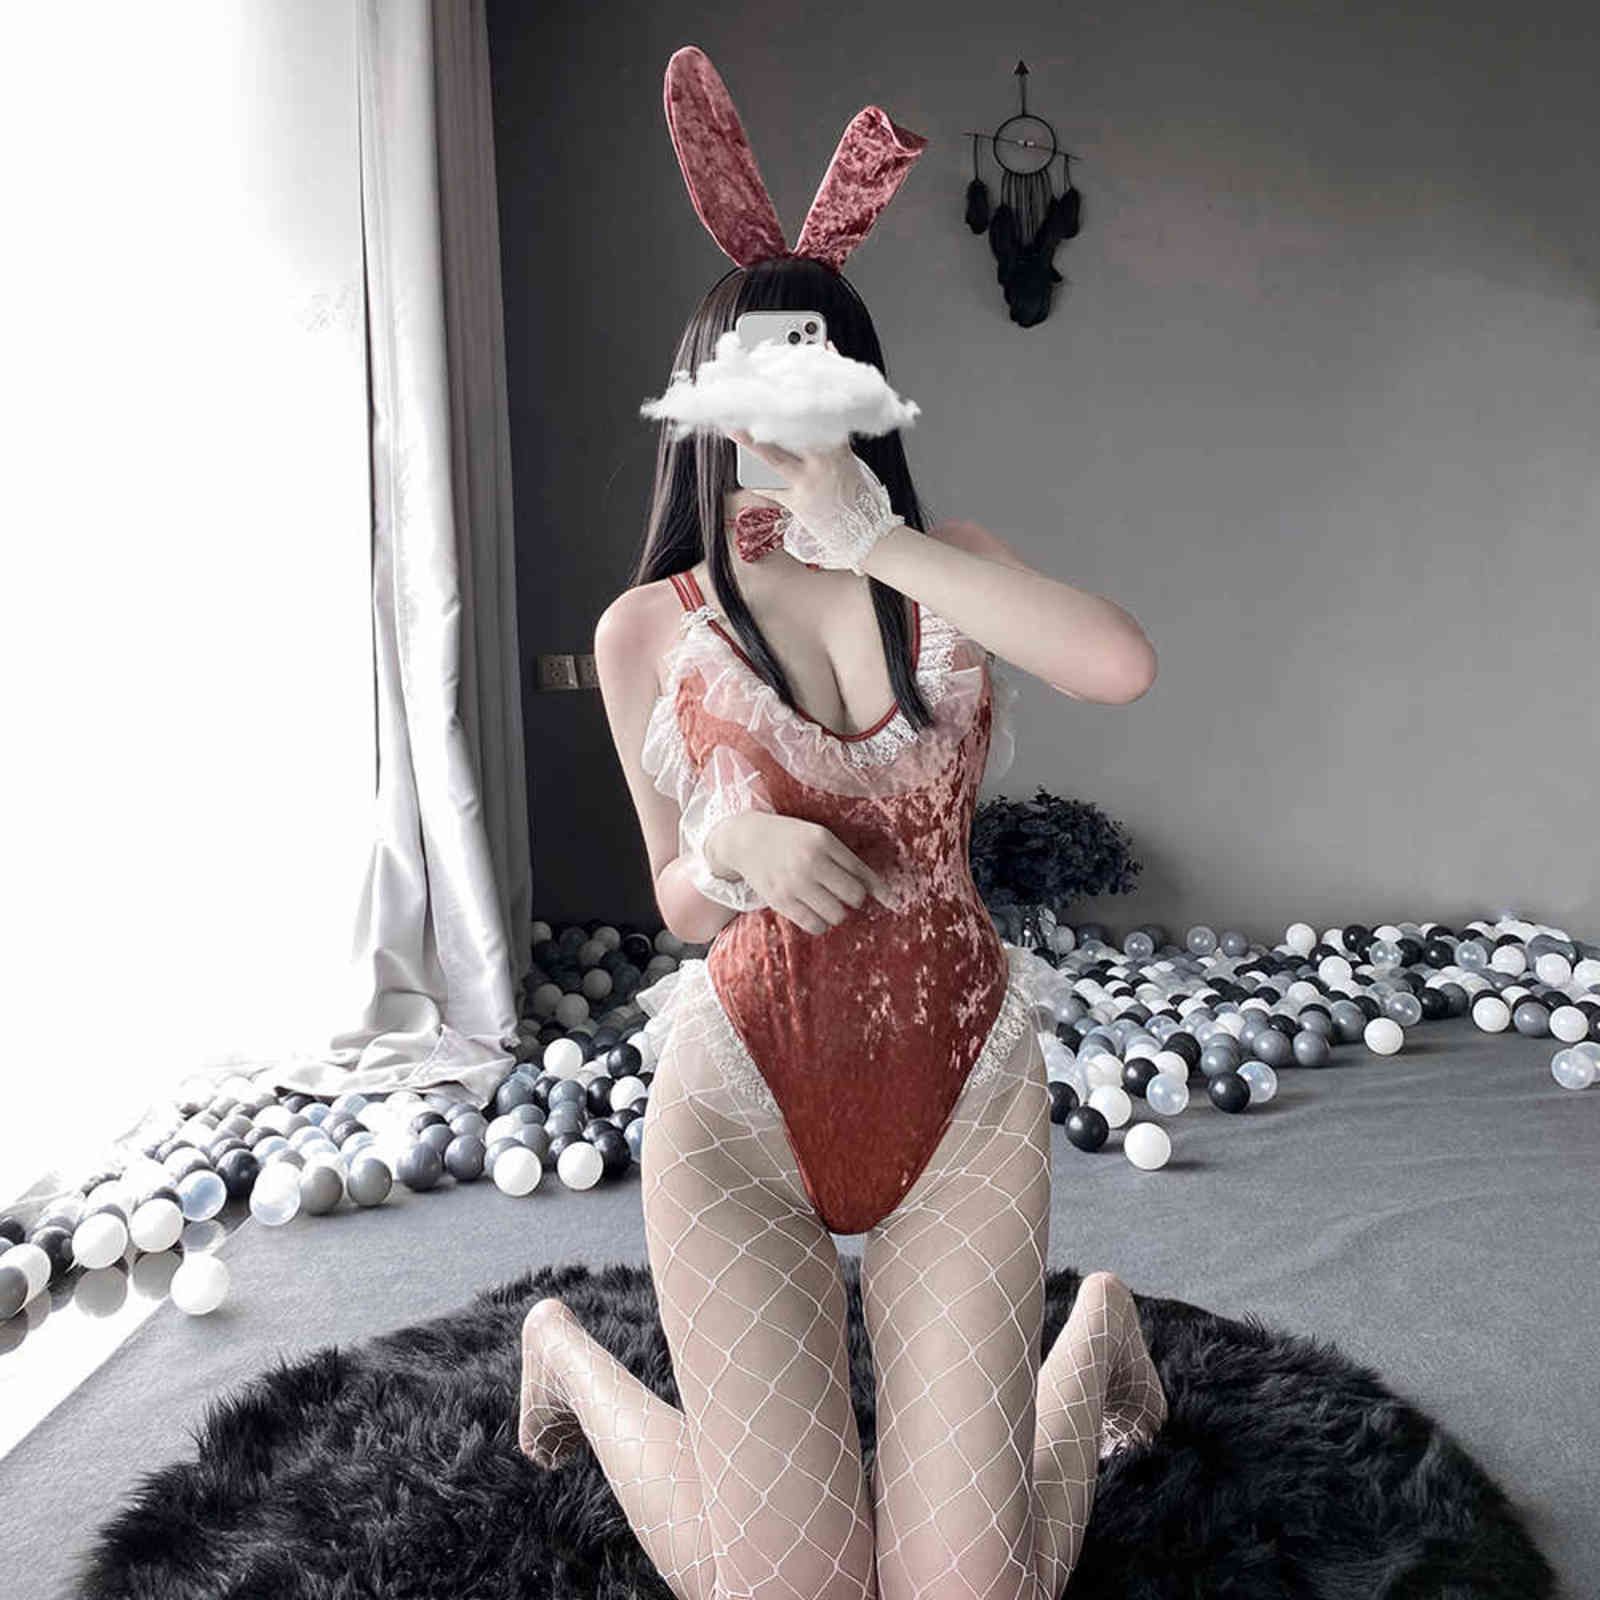 Sexy Set Anime Bunny Girl Cosplay Costume Halloween Costumes For Women  Velvet Bodysuit Erotic Roleplay Kawaii Lingerie Couple 1125 From  Sexwellness, $18.08 | DHgate.Com